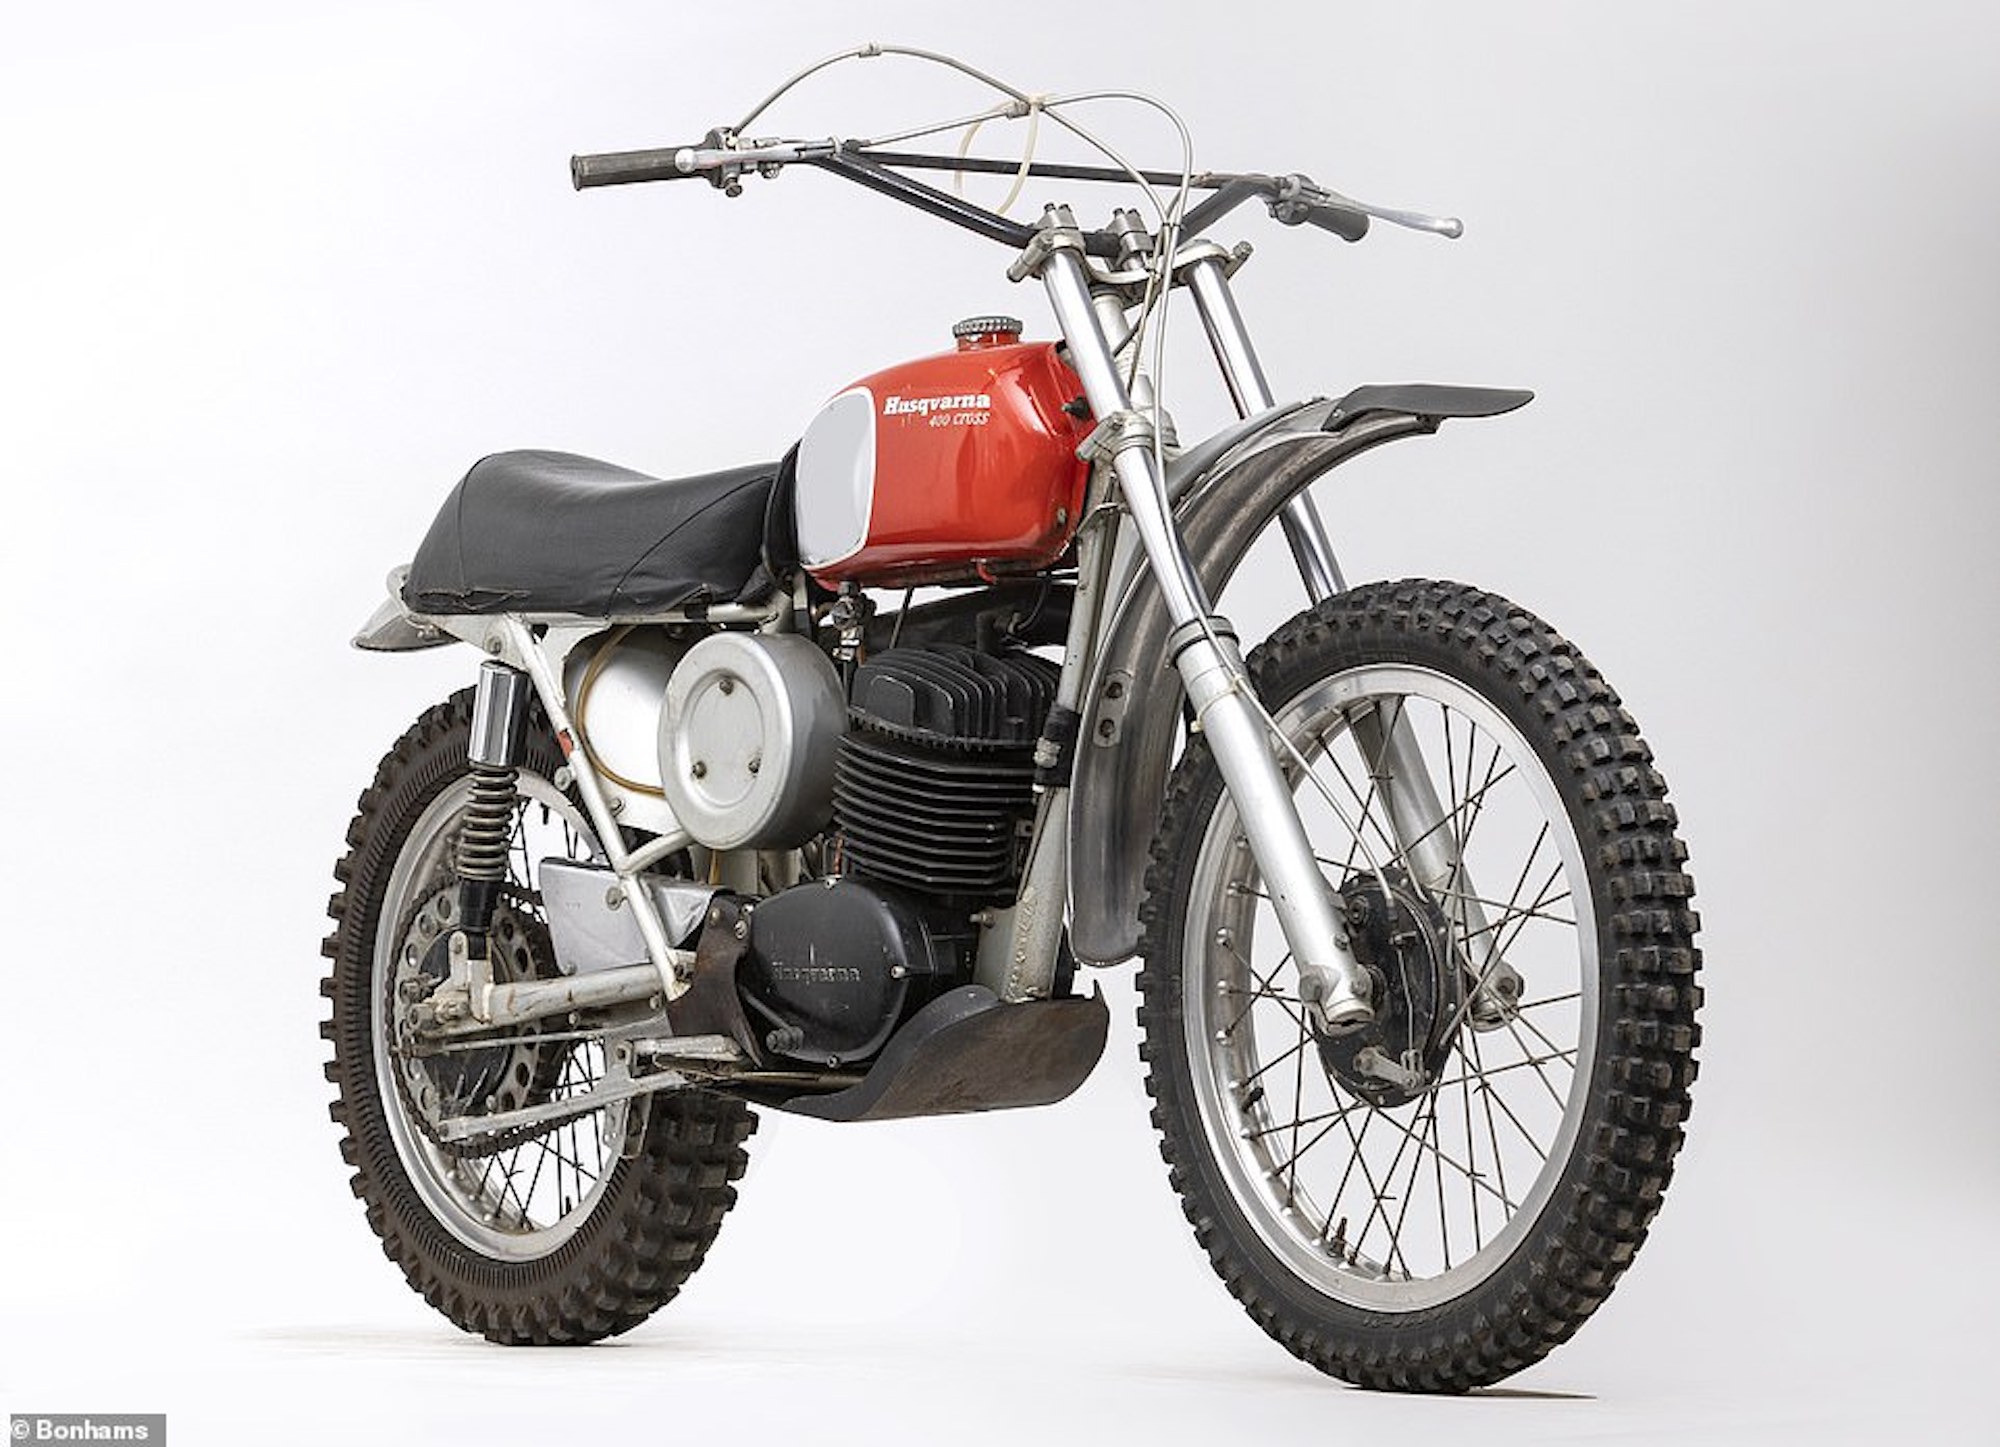 Steve McQueen's Husqvarna Cross 500, which just sold at auction. Media sourced from Public News Time.